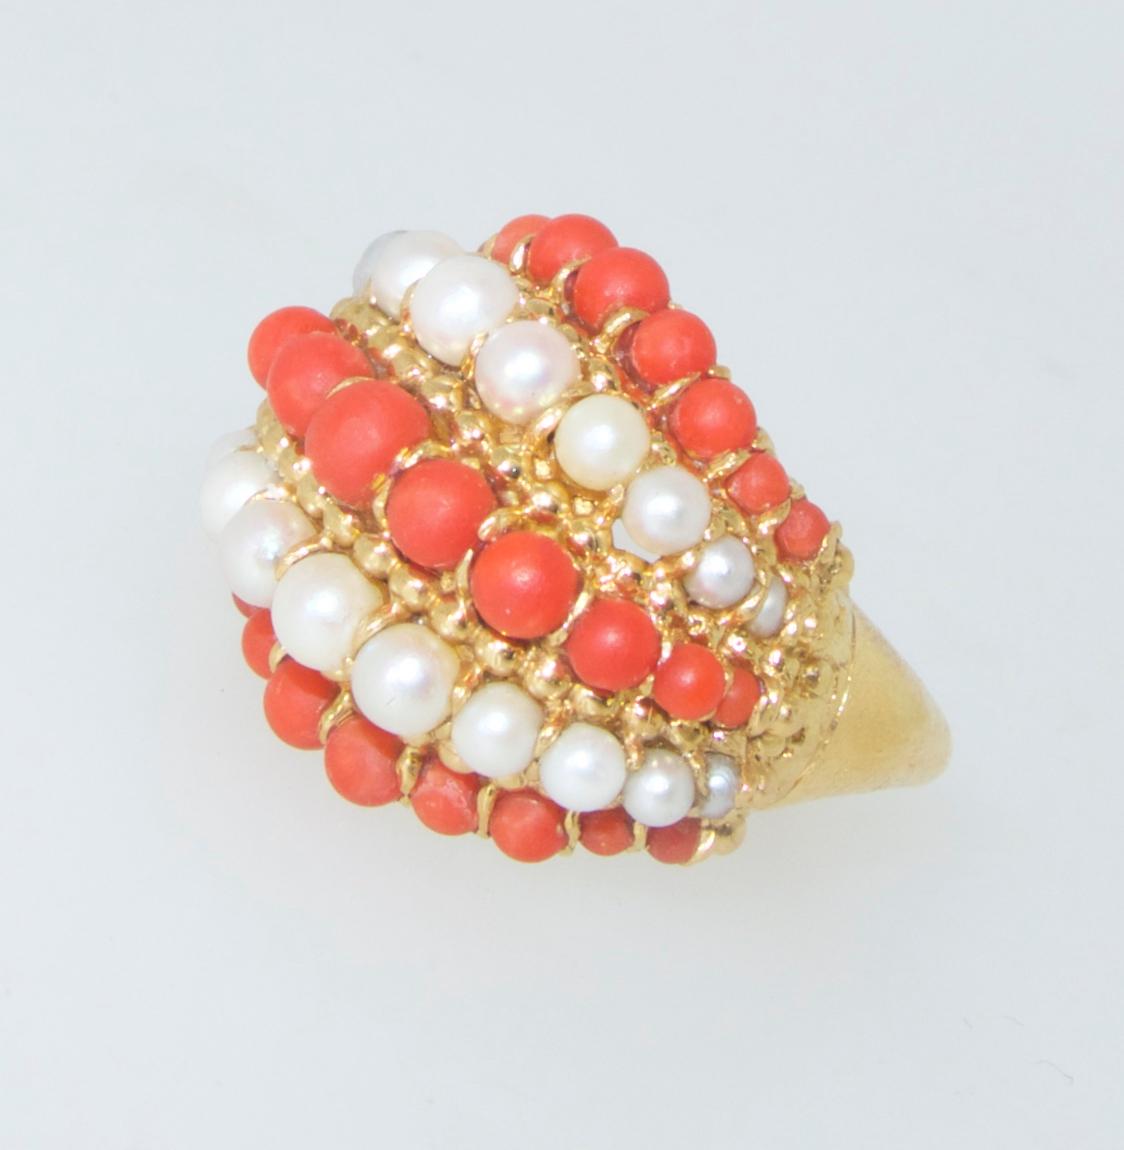 Van Cleef & Arpels circa 1960 ring possessing fine deep orange natural coral and white round fine pearls.  Done in a swirl like design is classic Van Cleef & Arpels work during this decade.  This 18K yellow gold ring is in fine condition and signed,